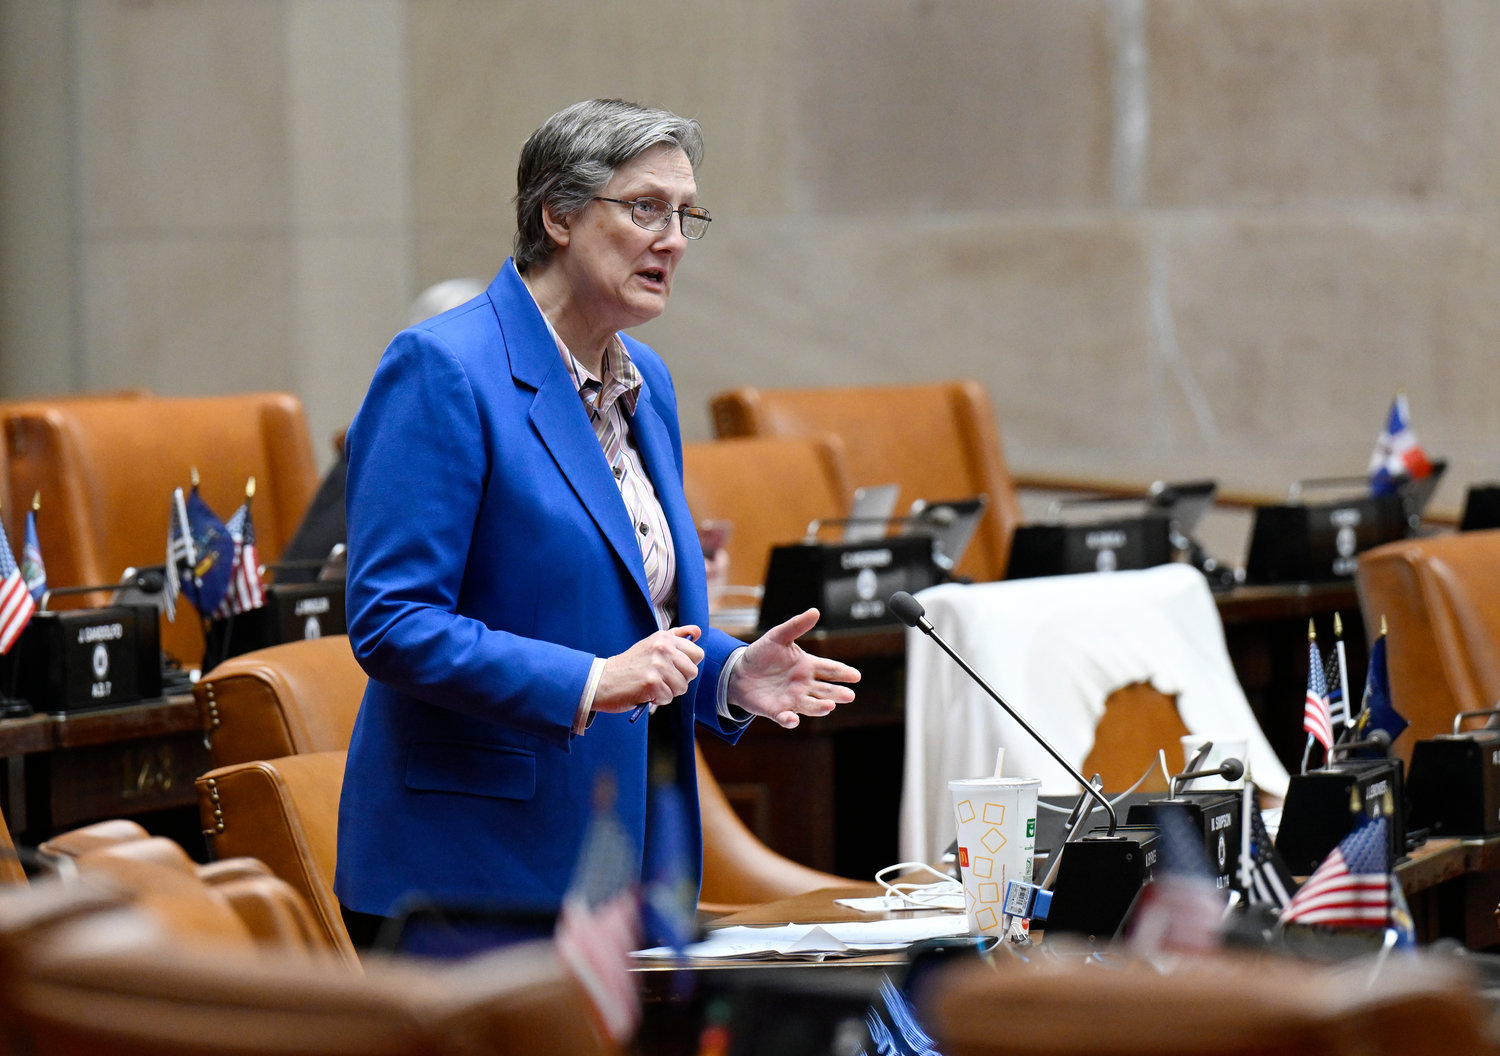 Assemblywoman Marjorie Byrnes, R-Caledonia, debates budget bills during a legislative session in the Assembly Chamber at the state Capitol, Friday, April 8, 2022, in Albany, N.Y. (AP Photo/Hans Pennink)